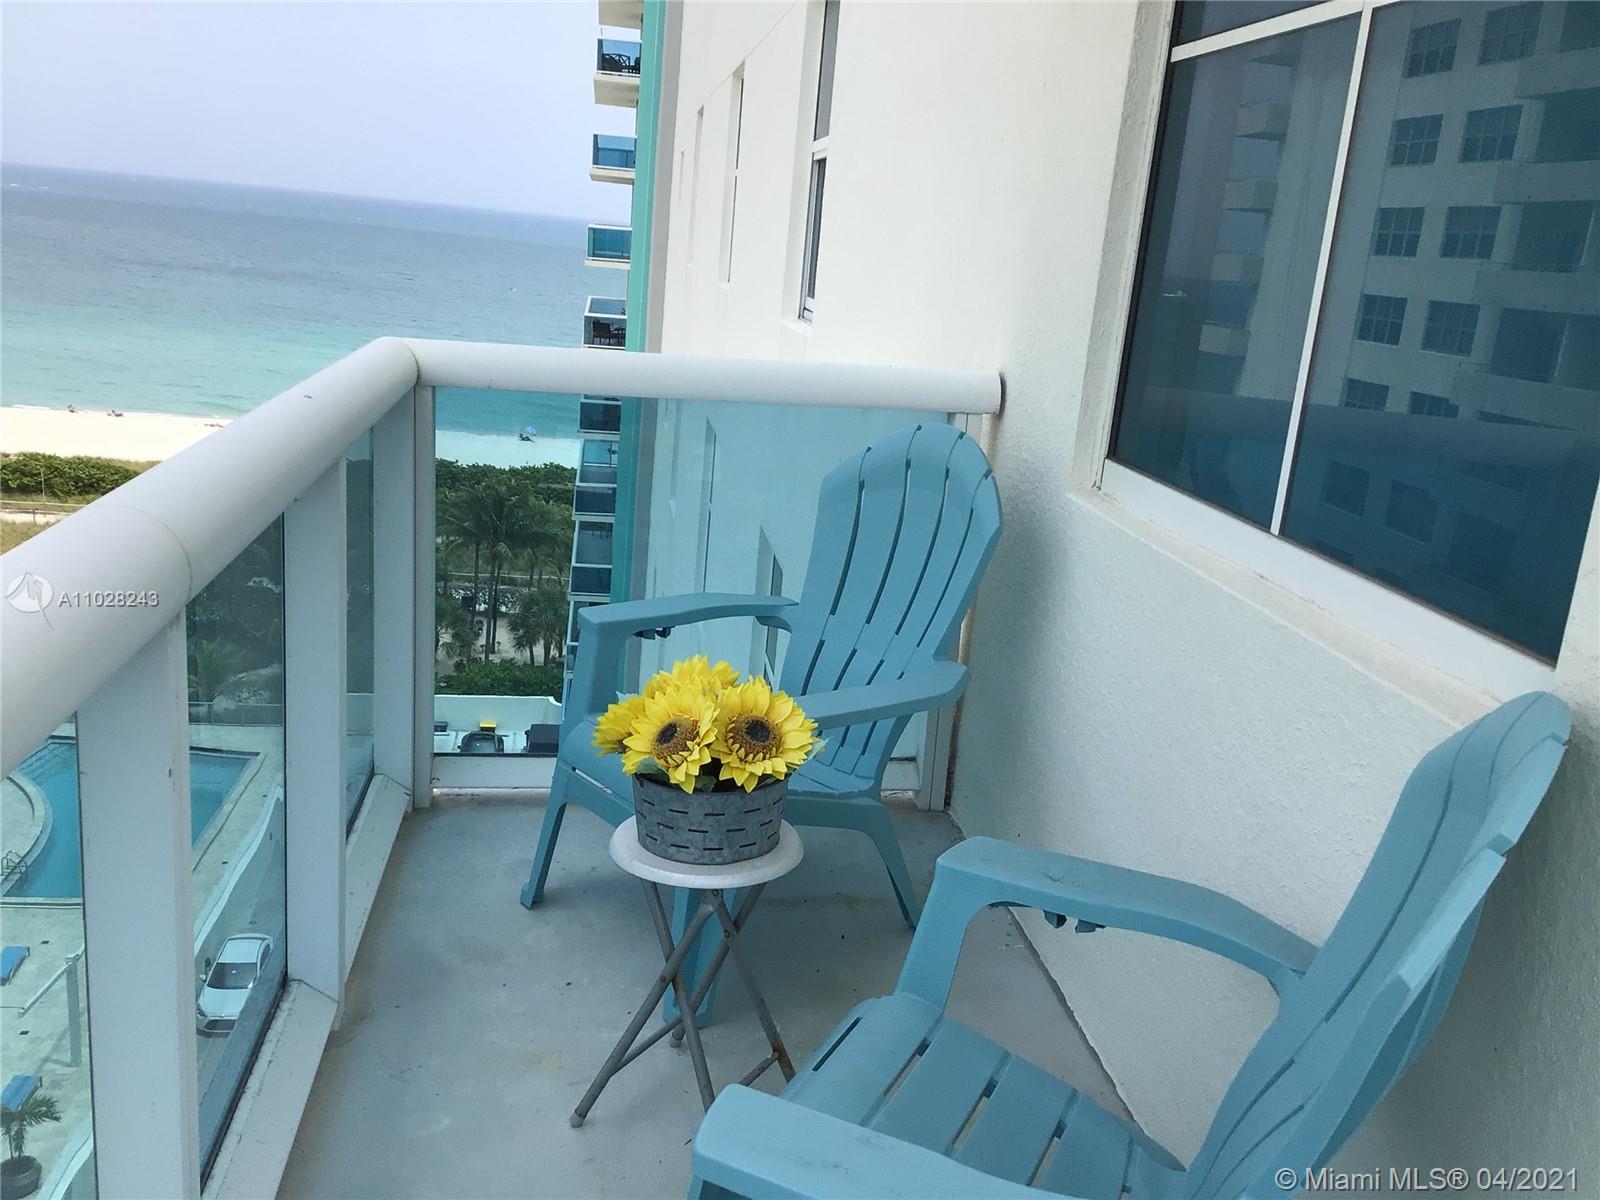 Photo 1 of The Waverly At Surfside B Apt 921 in Surfside - MLS A11028243